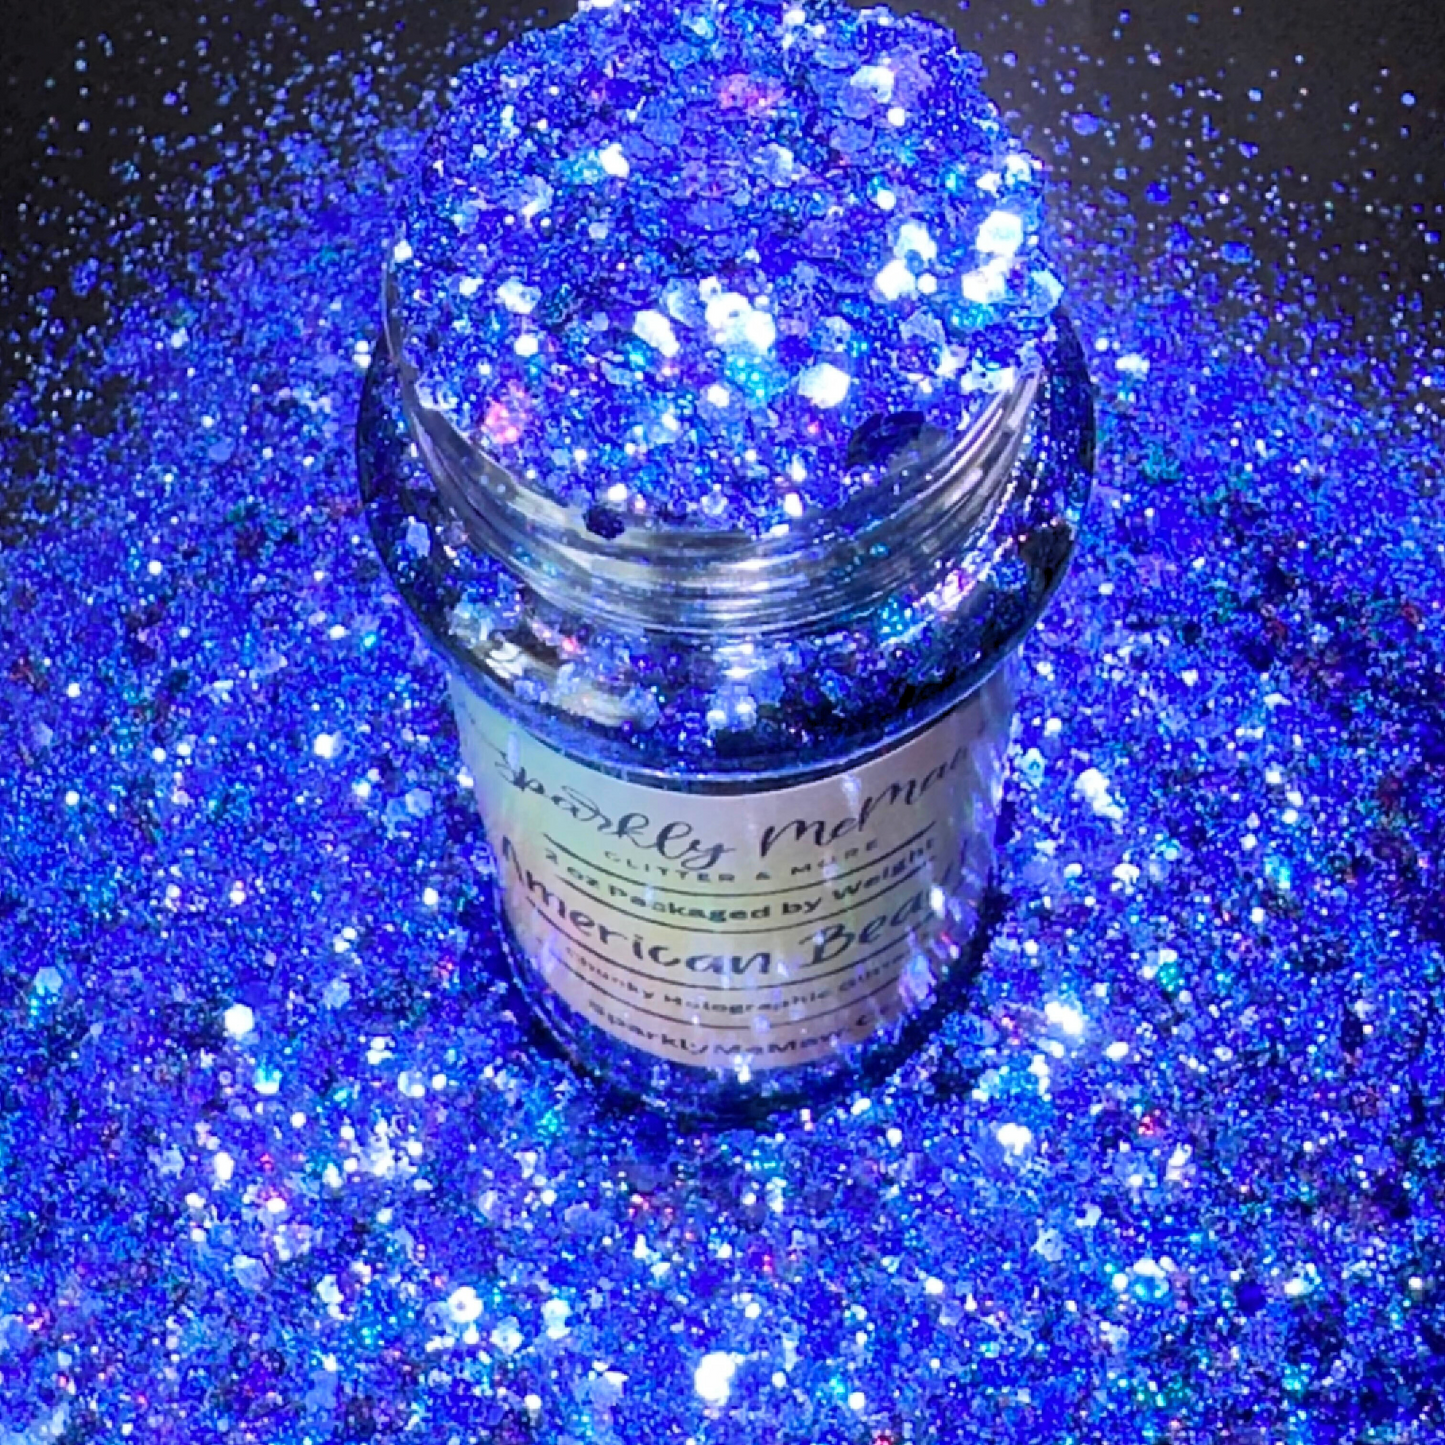 American Beauty Extra Sparkle Chunky Holographic Glitter Mix